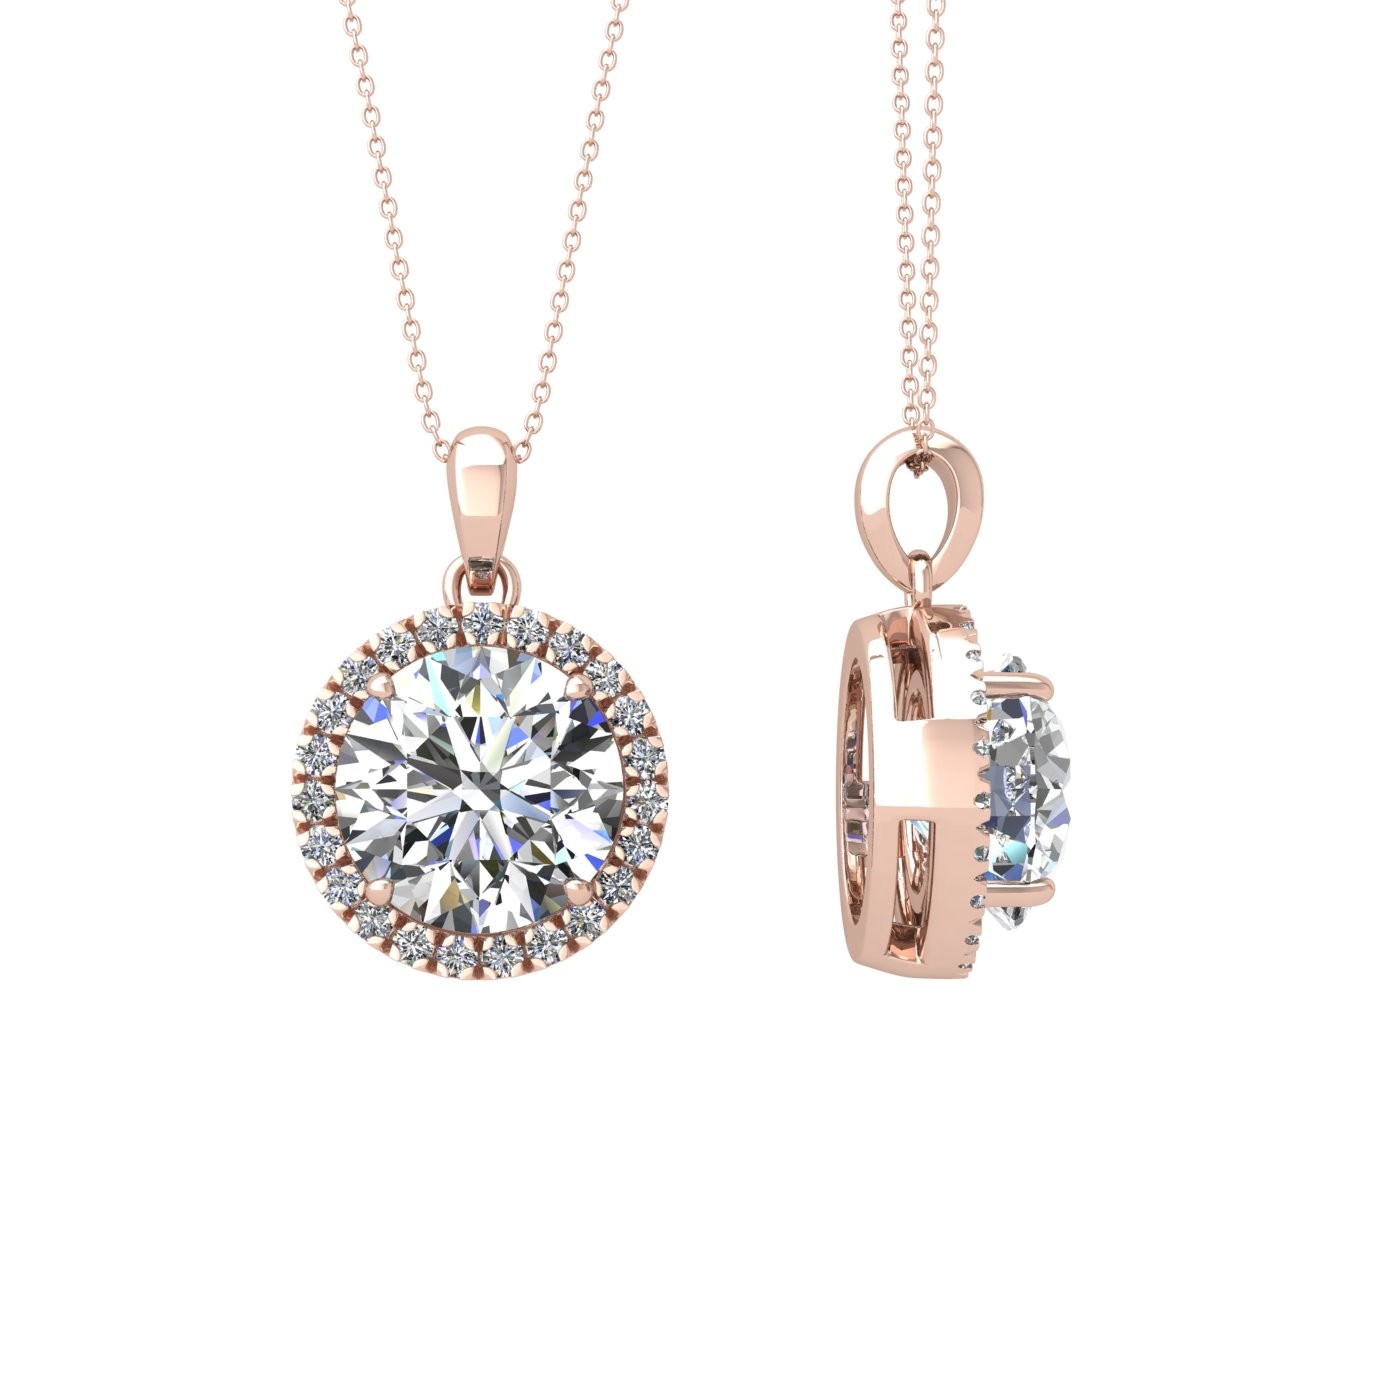 18k rose gold  1 ct 4 prong round shape diamond pendant with diamond pavÉ set halo including chain seperate from the pendant Photos & images